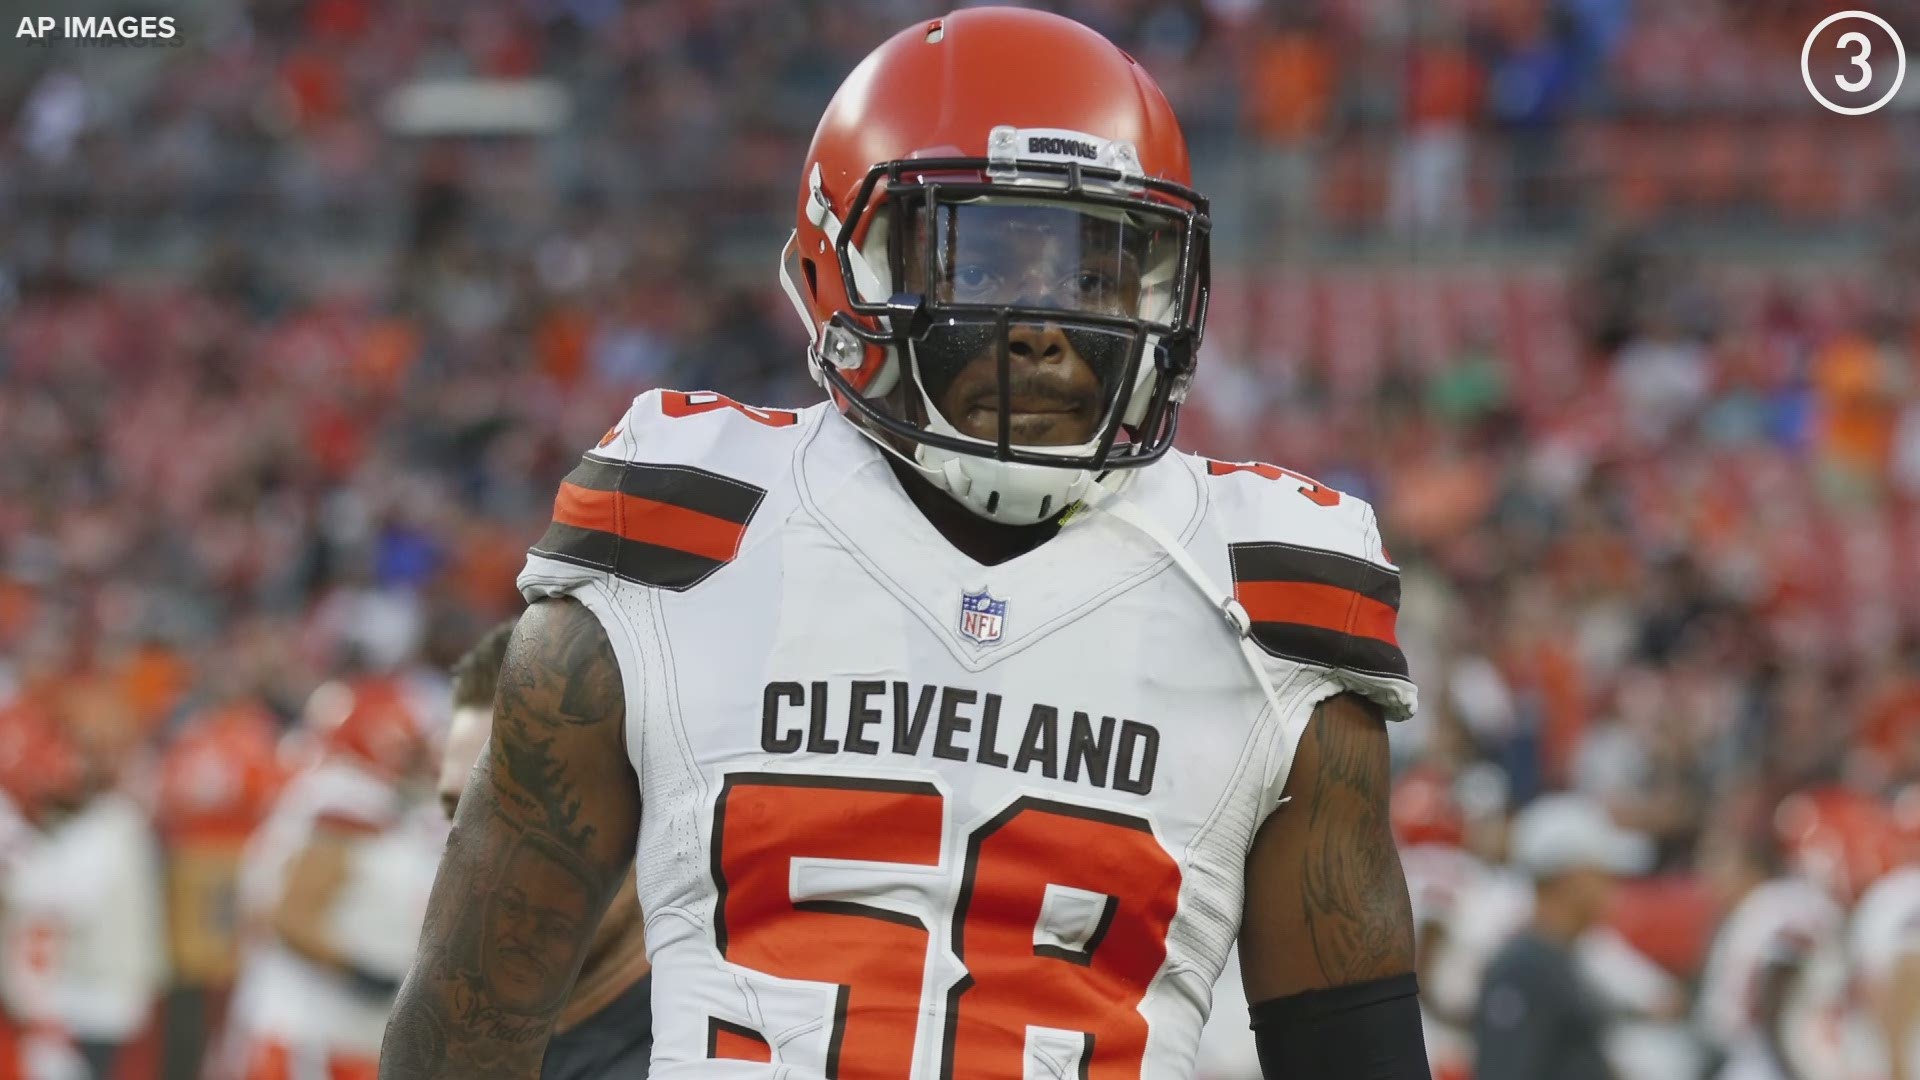 Bad break for the veteran!  Cleveland Browns linebacker Christian Kirksey will miss the balance of the 2019 season following chest surgery.